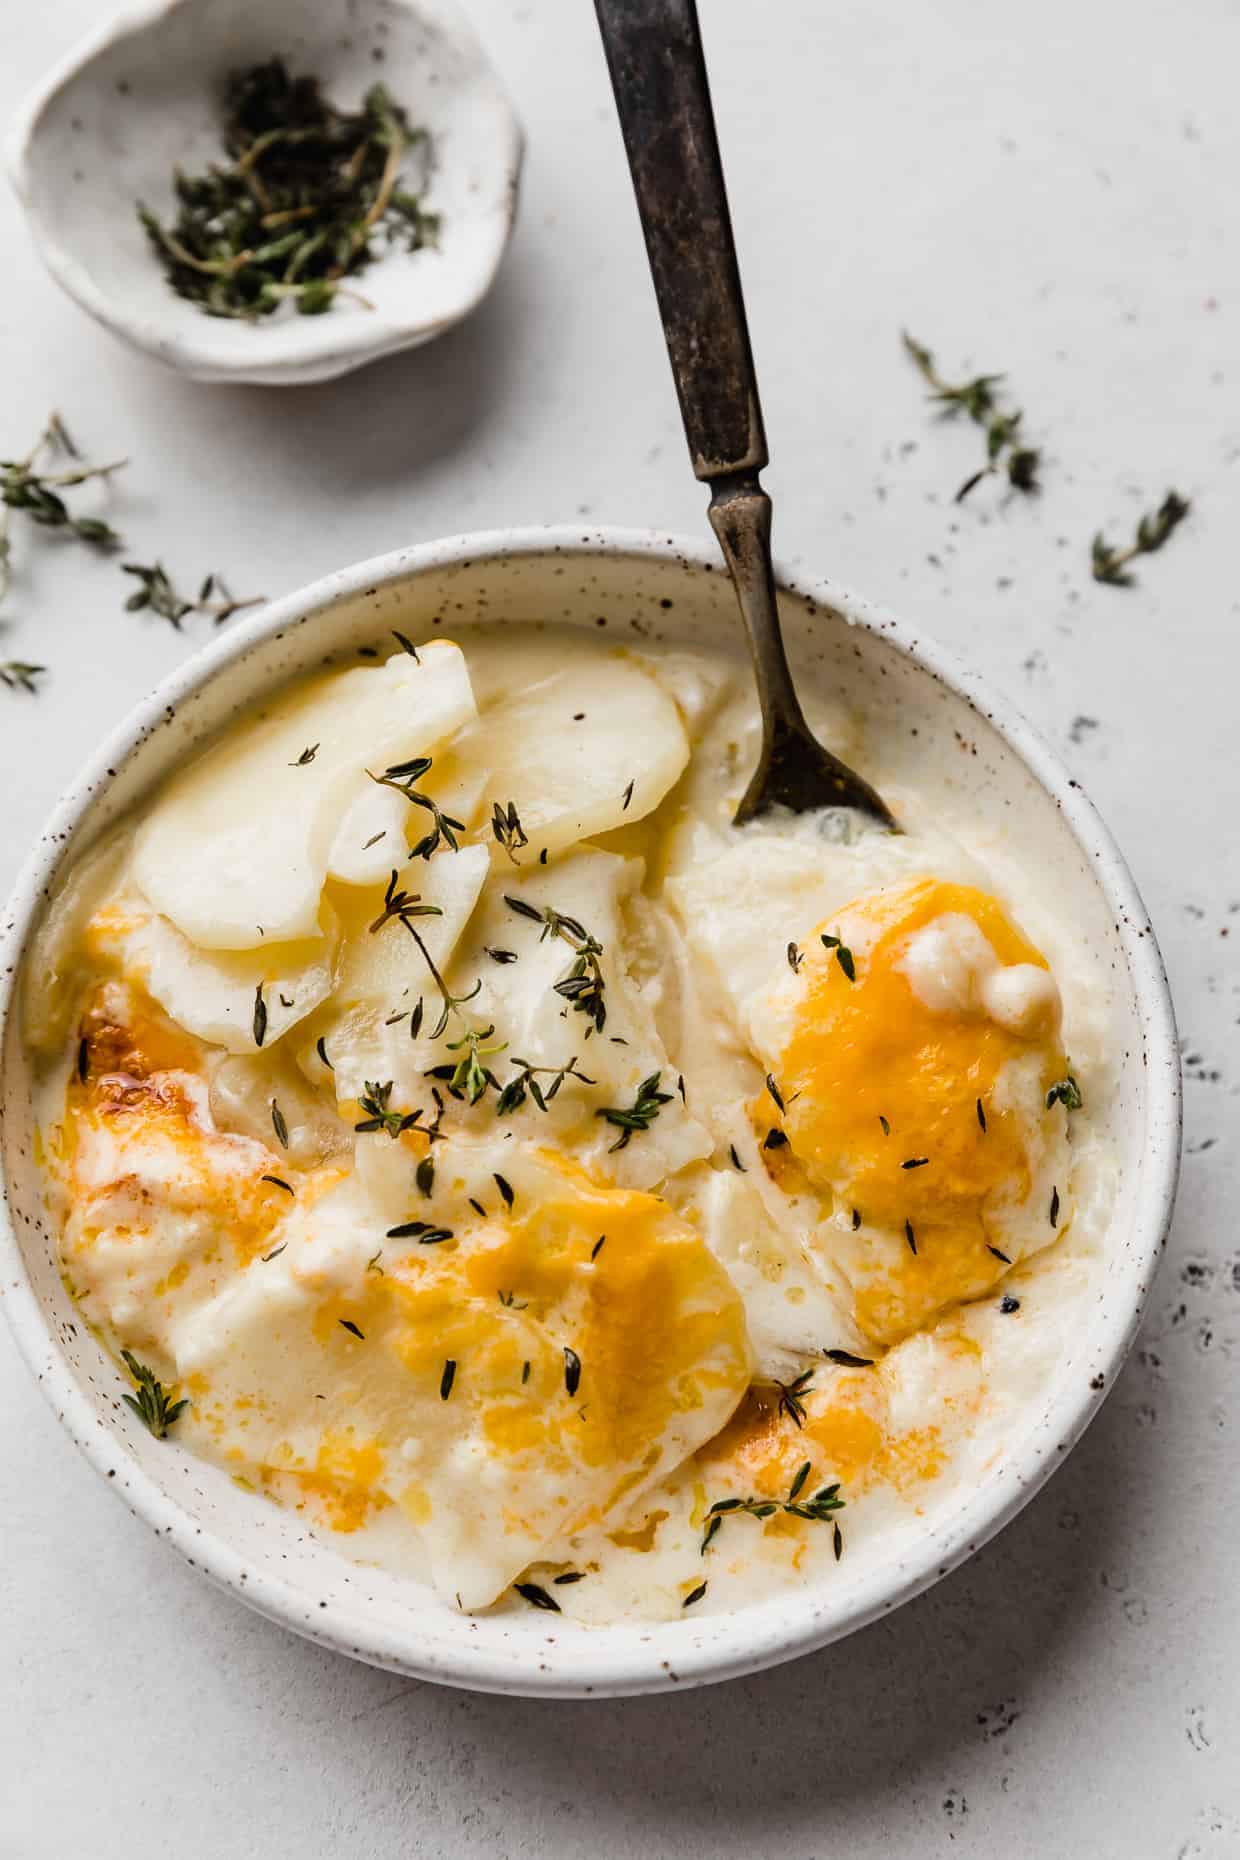 A fork amongst a plate of scalloped potatoes topped with cheddar cheese and fresh thyme, against a light gray background.